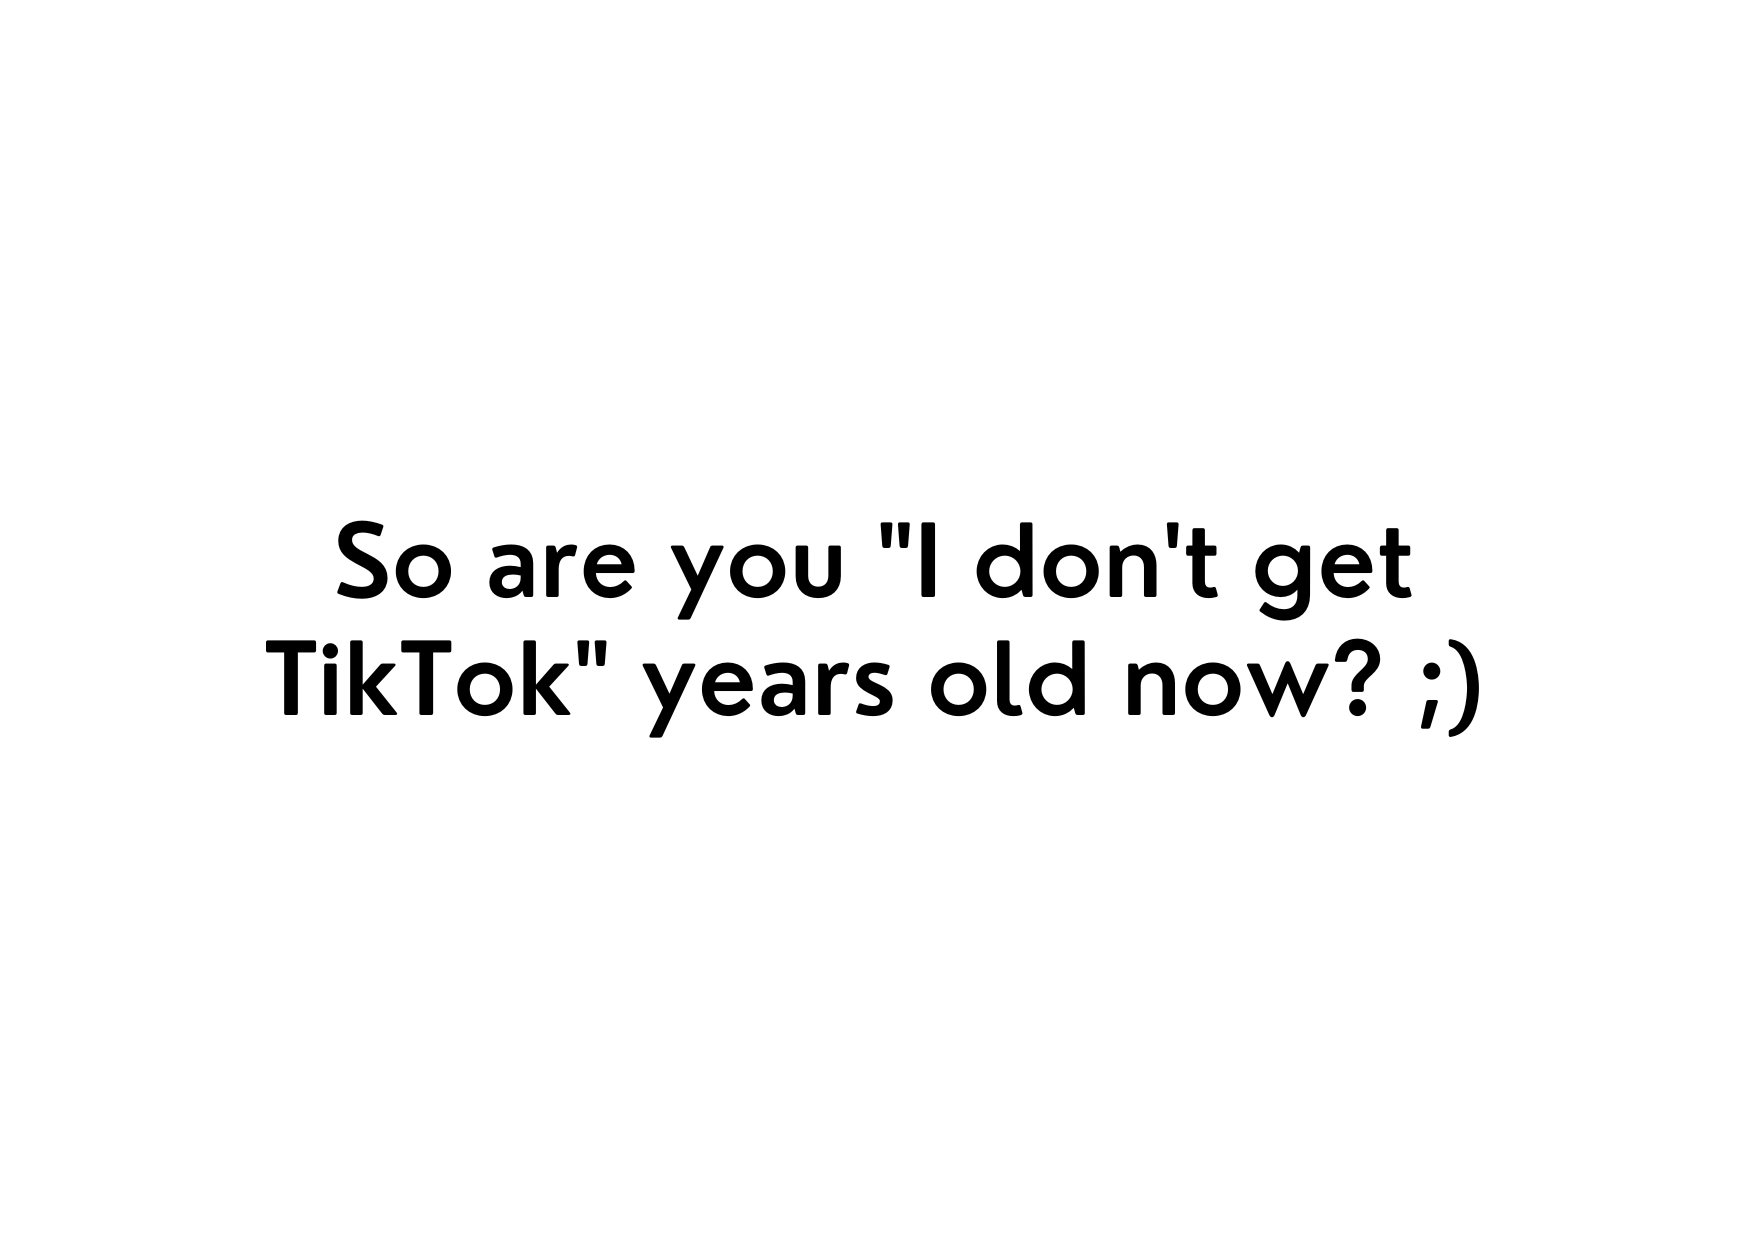 White seed paper greeting card saying "So are you 'I don't get TikTok' years old now? ;)